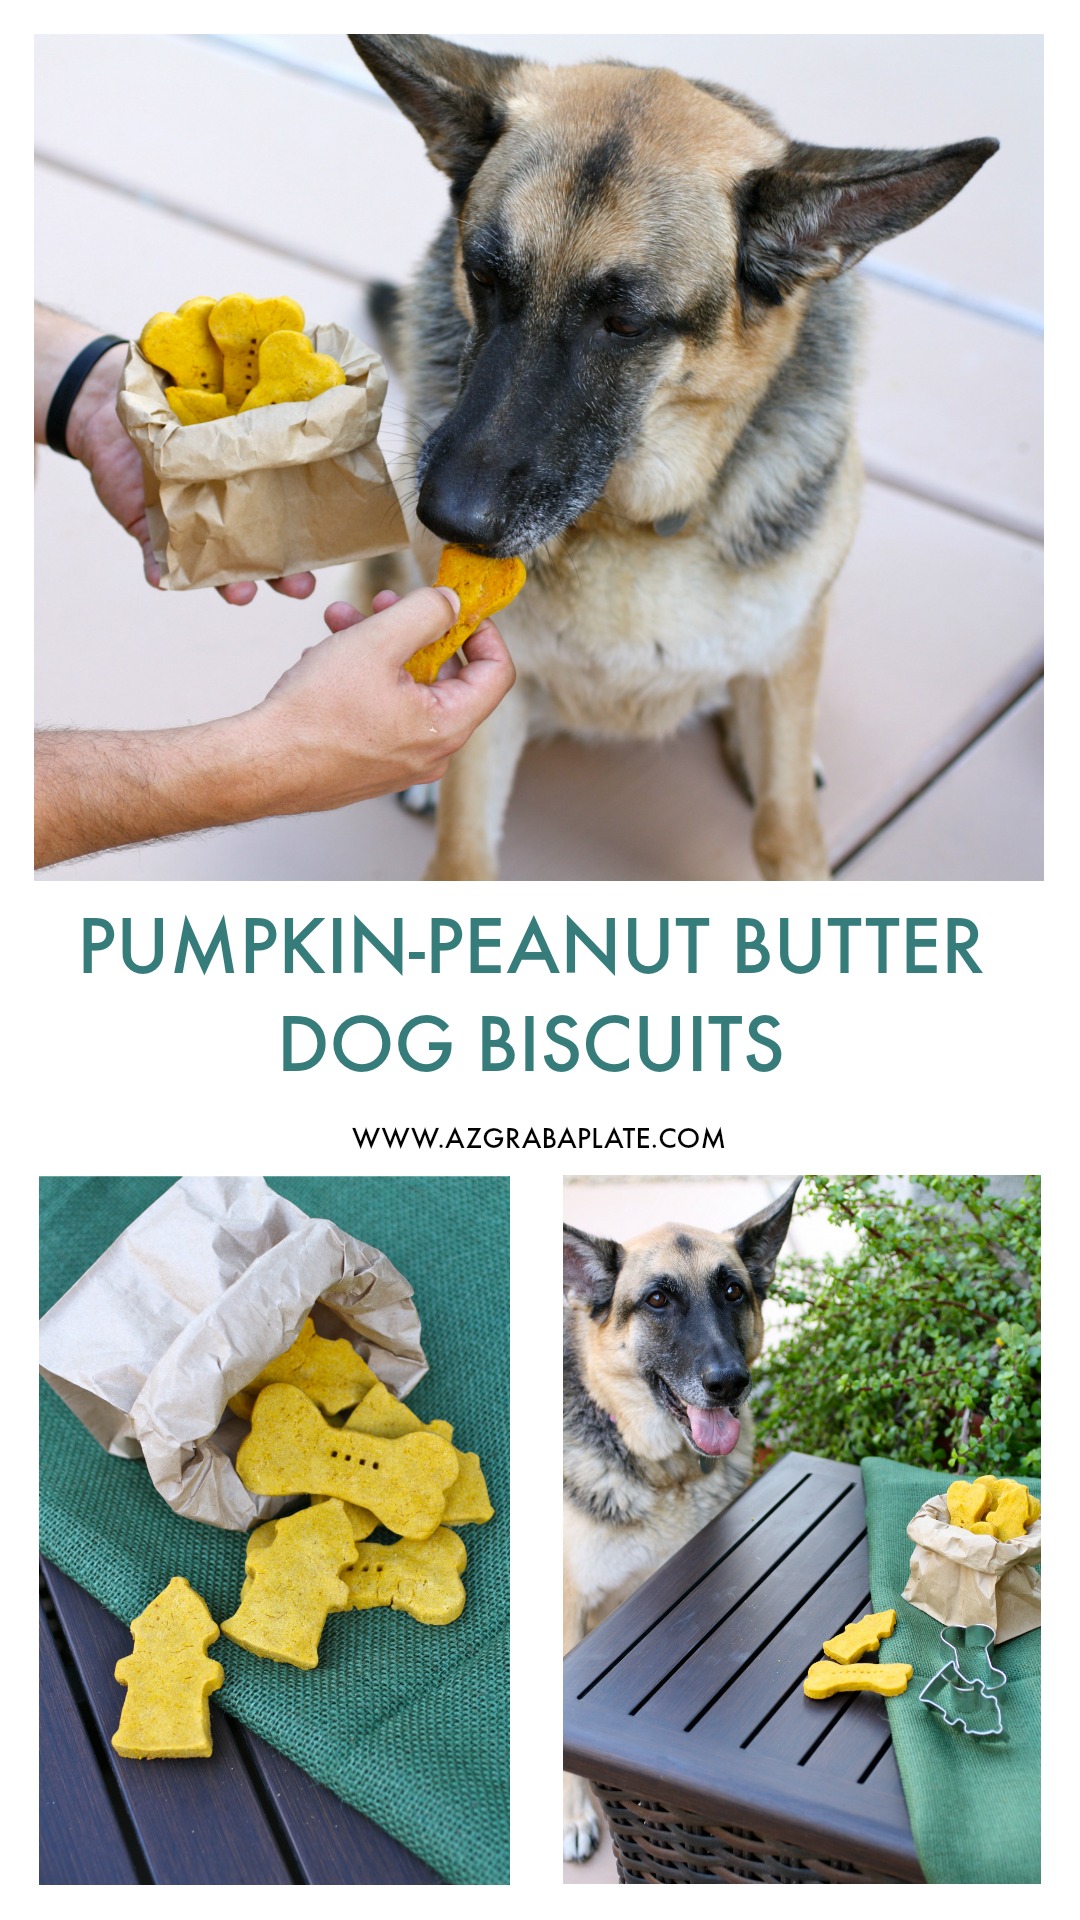 Pumpkin-Peanut Butter Dog Biscuits will become your pup's favorite treat! These are easy-to-make treats for your dog!